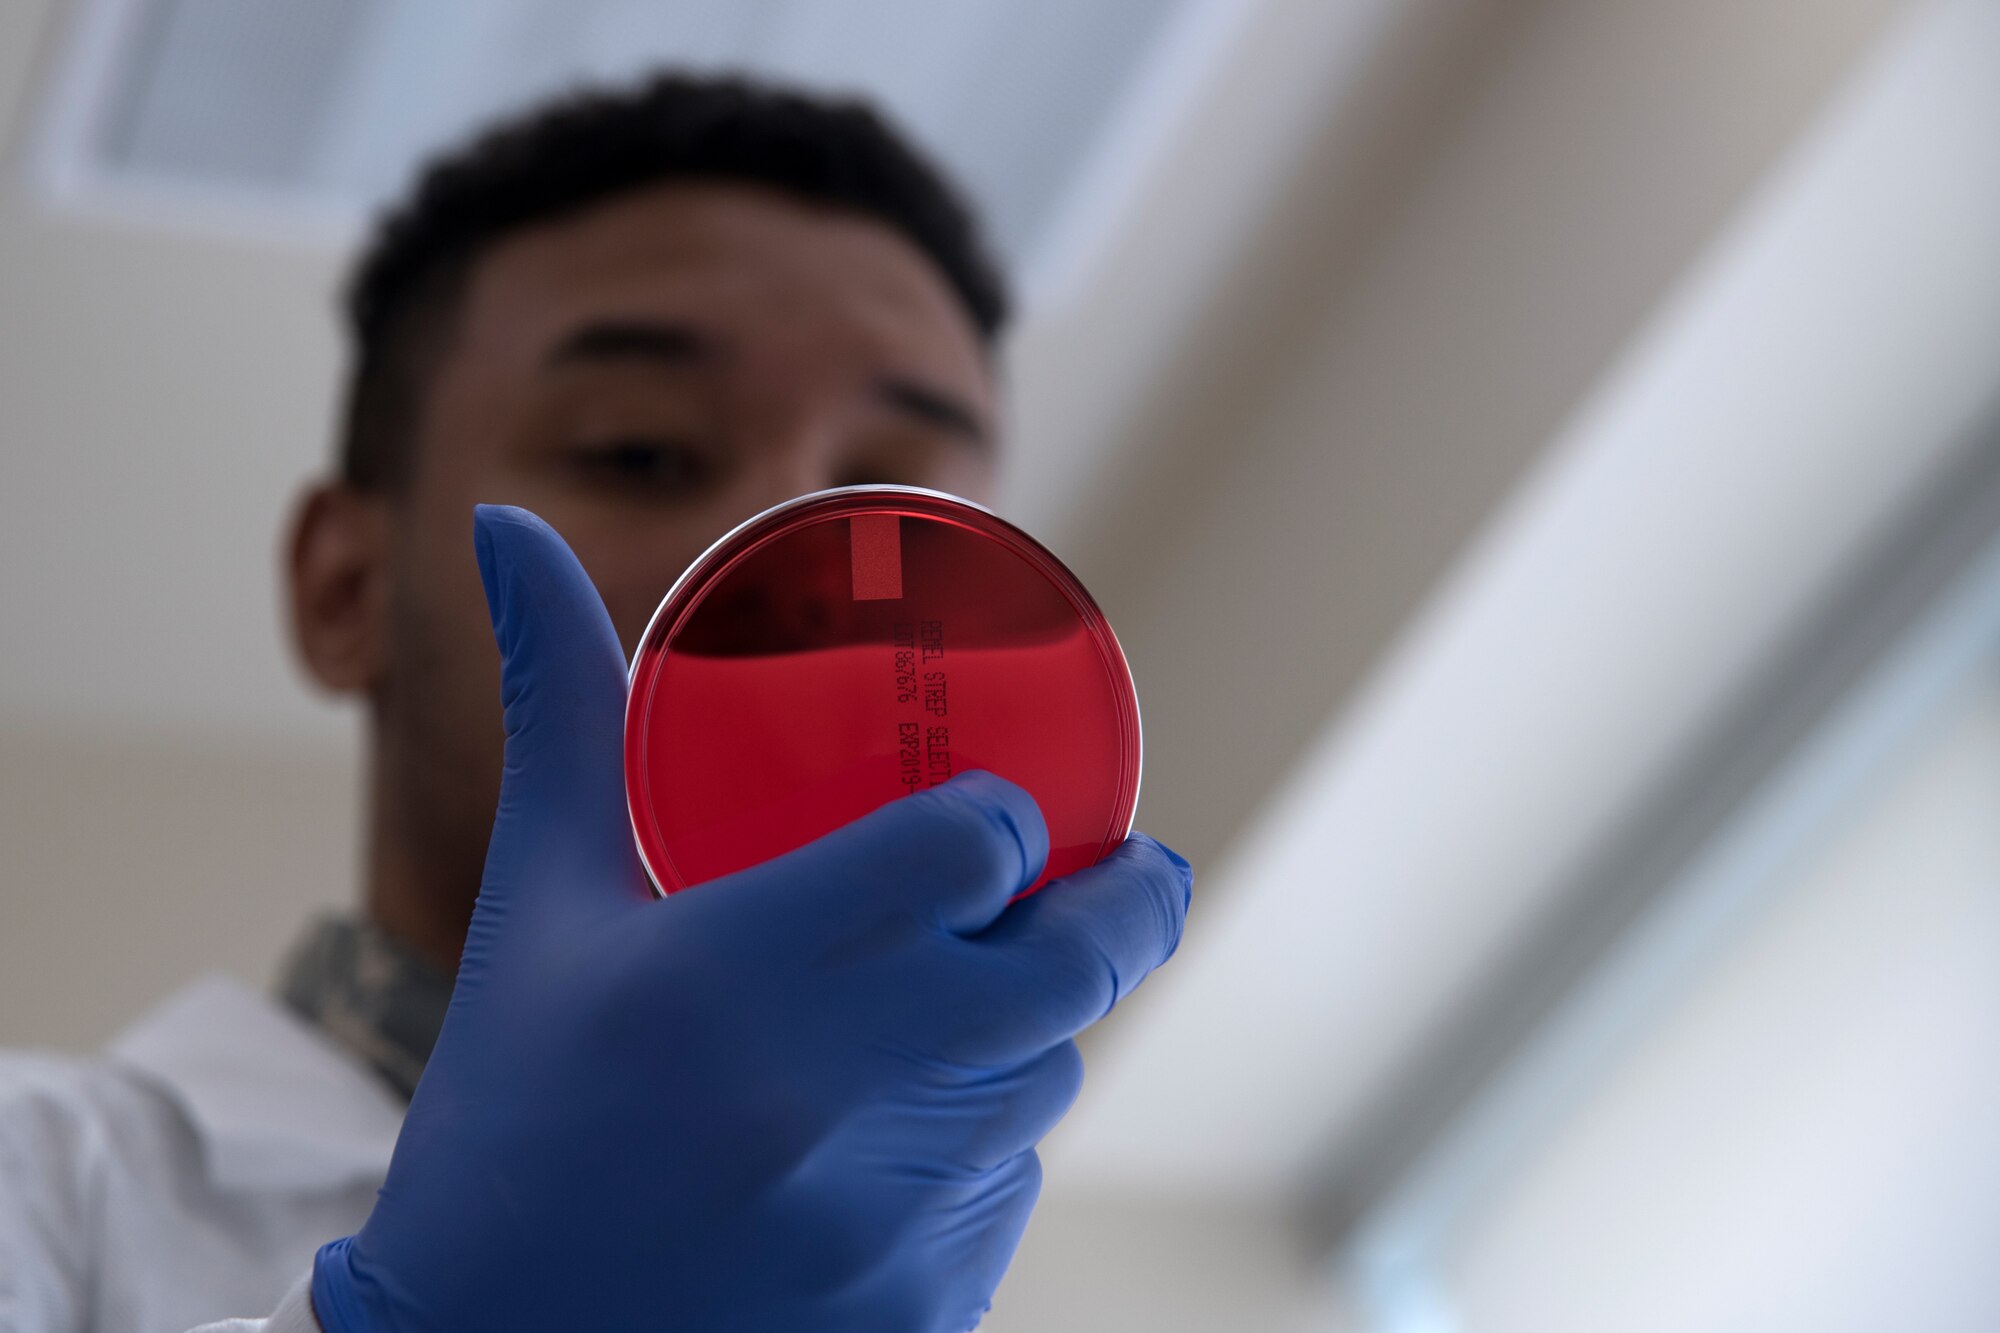 Photo of an Airman holding up a red blood plate used to grow bacteria